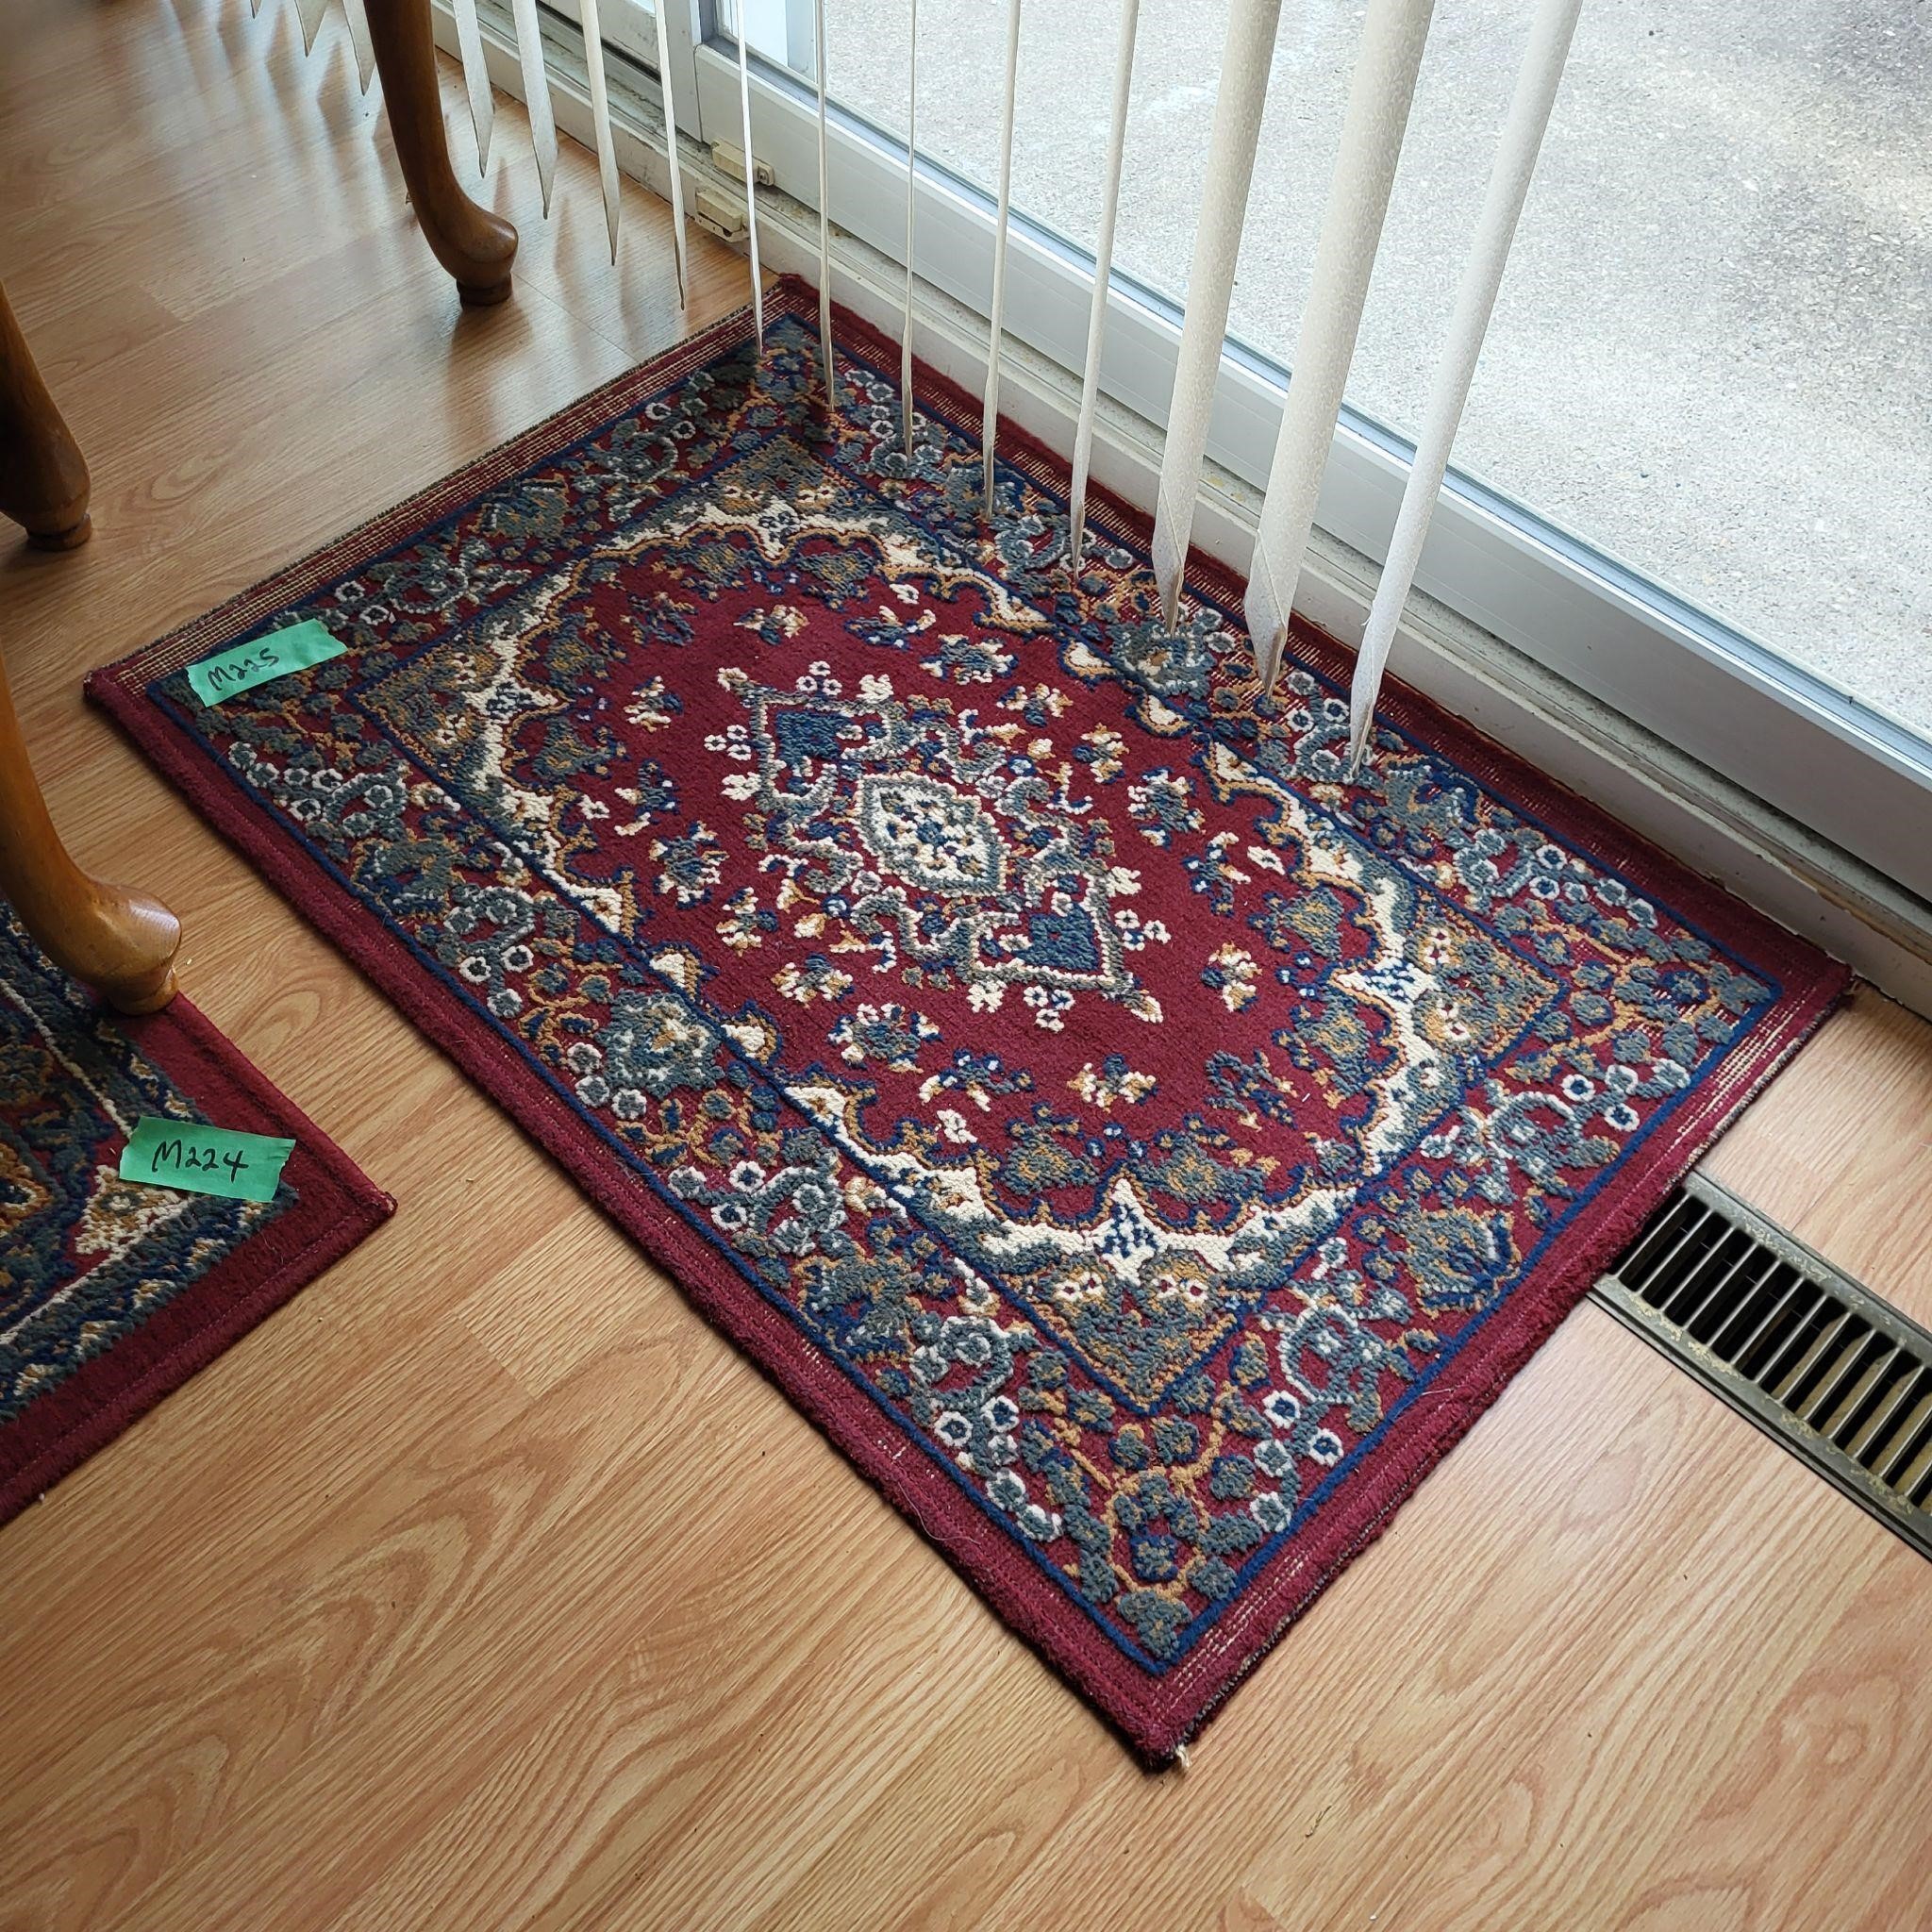 M225 Small area rug